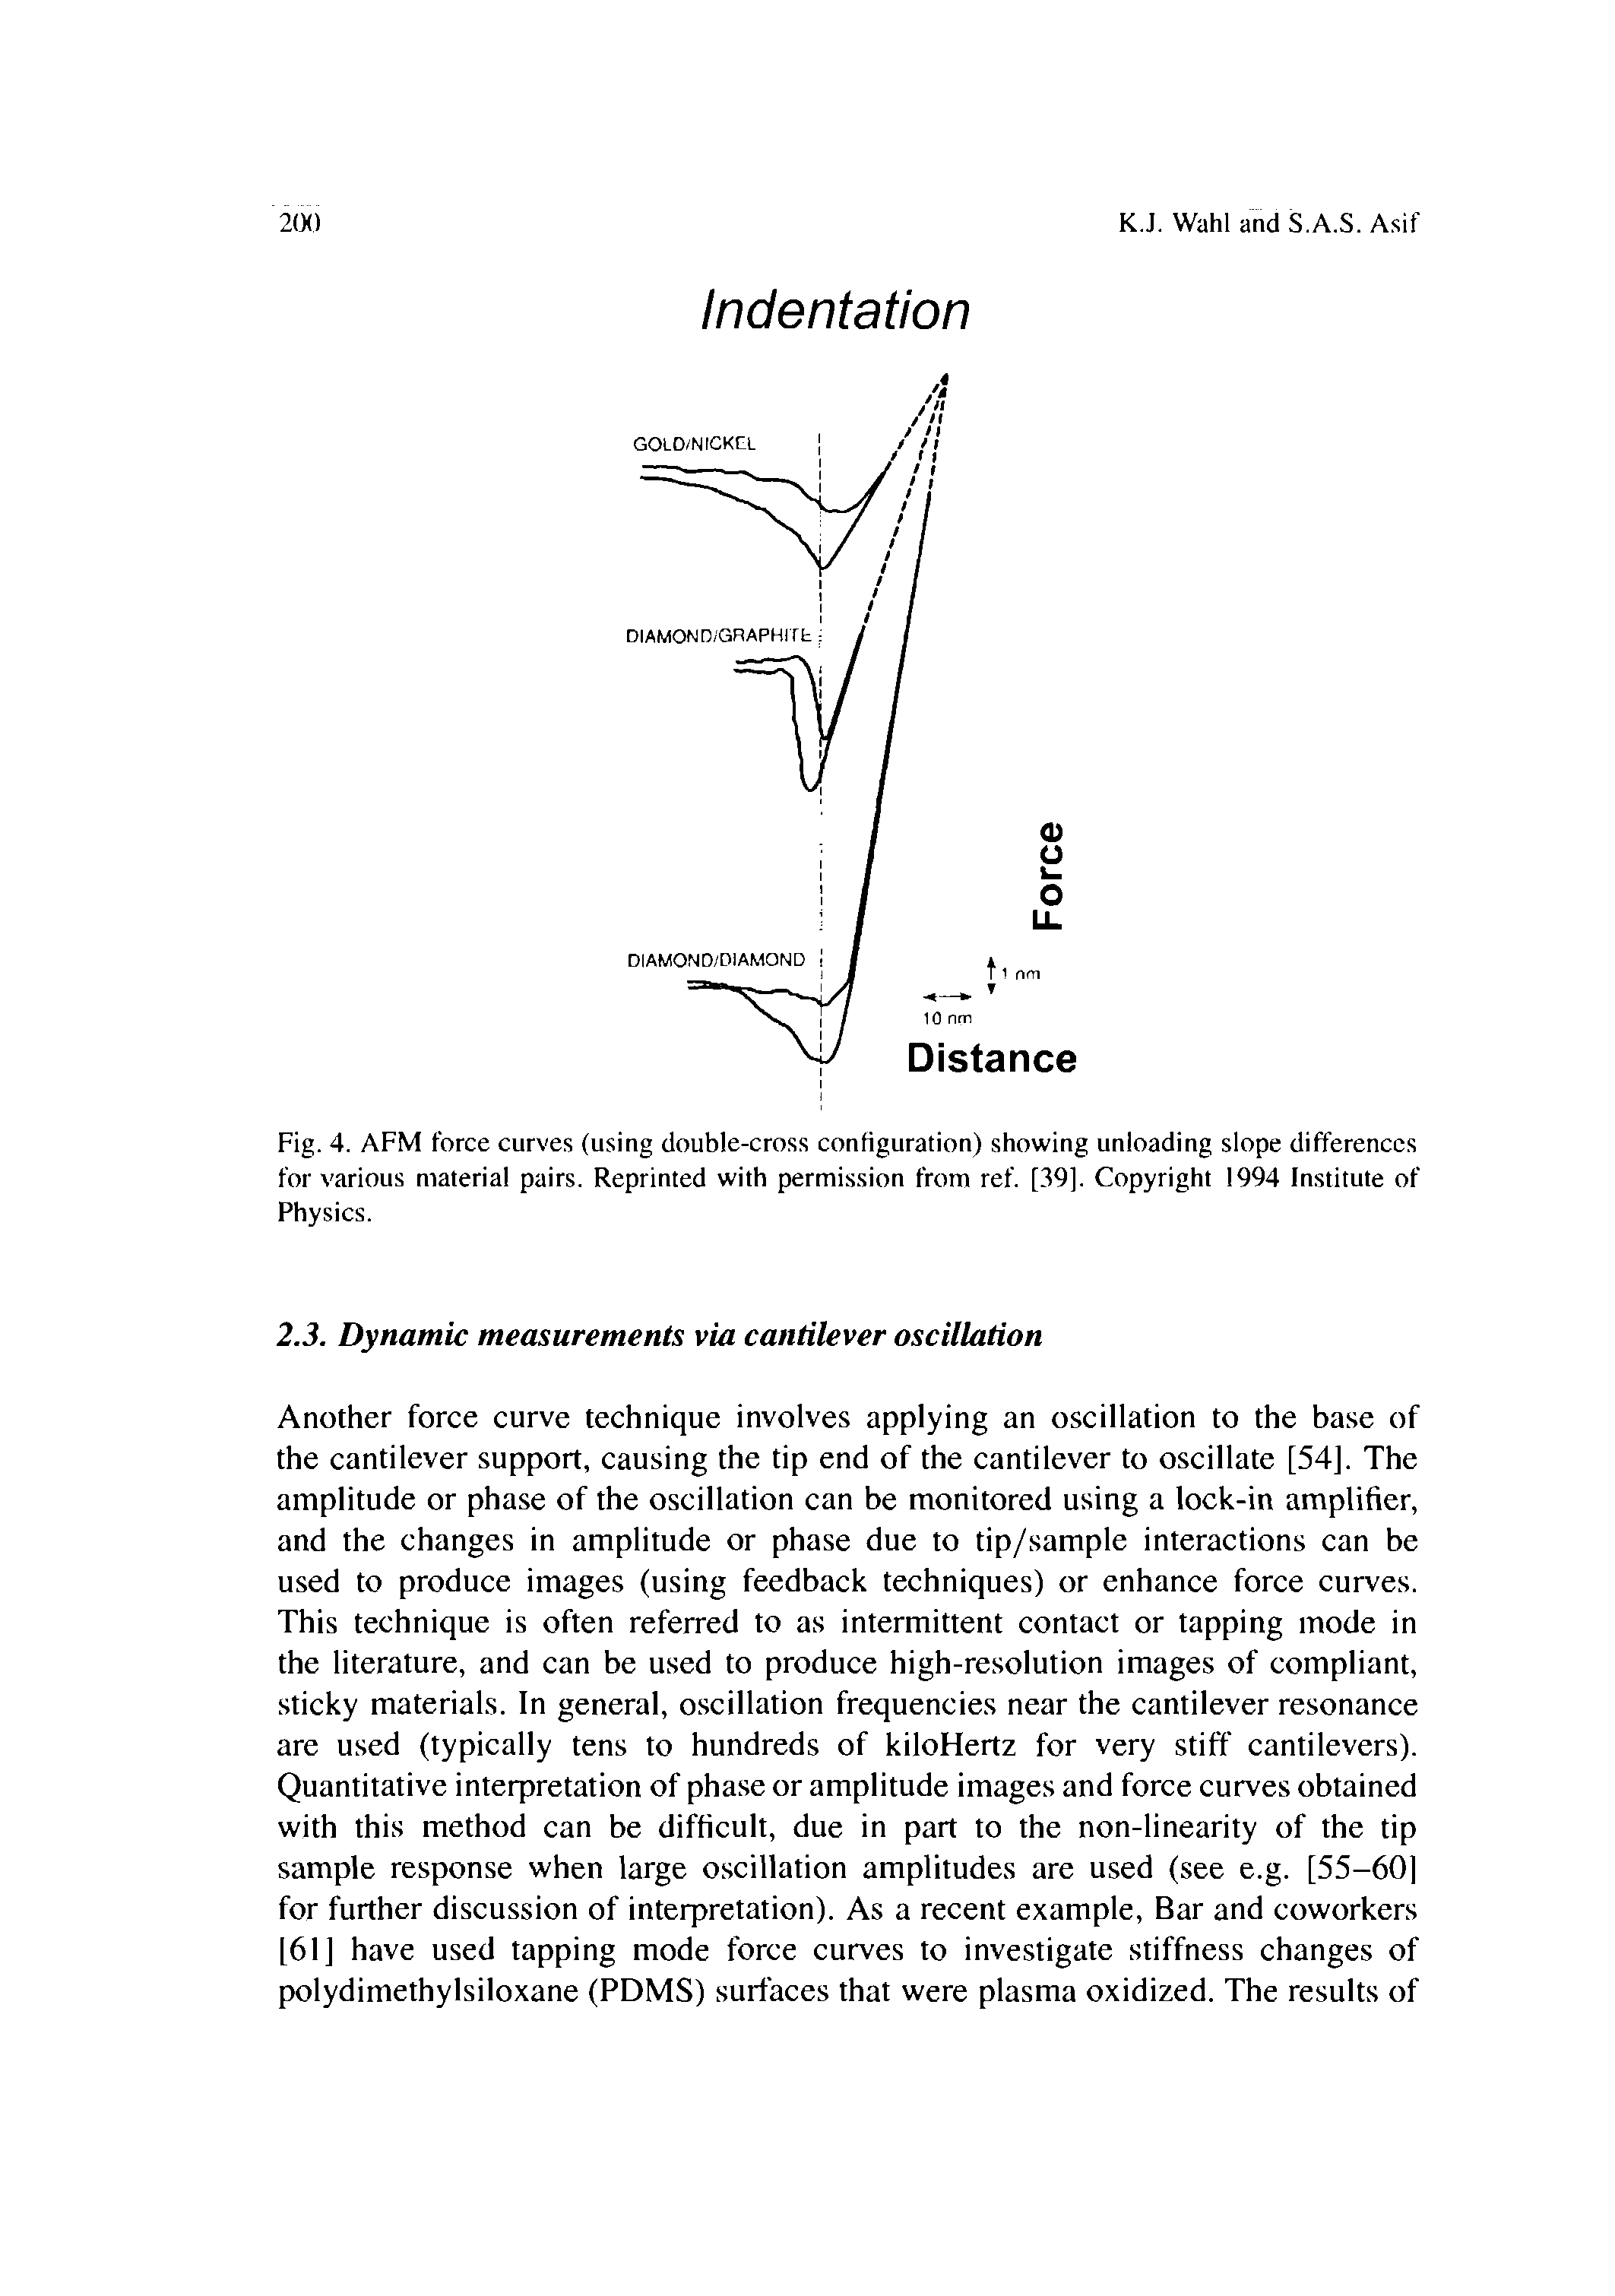 Fig. 4. AFM force curves (using double-cross configuration) showing unloading slope differences for various material pairs. Reprinted with permission from ref. [39]. Copyright 1994 Institute of Physics.